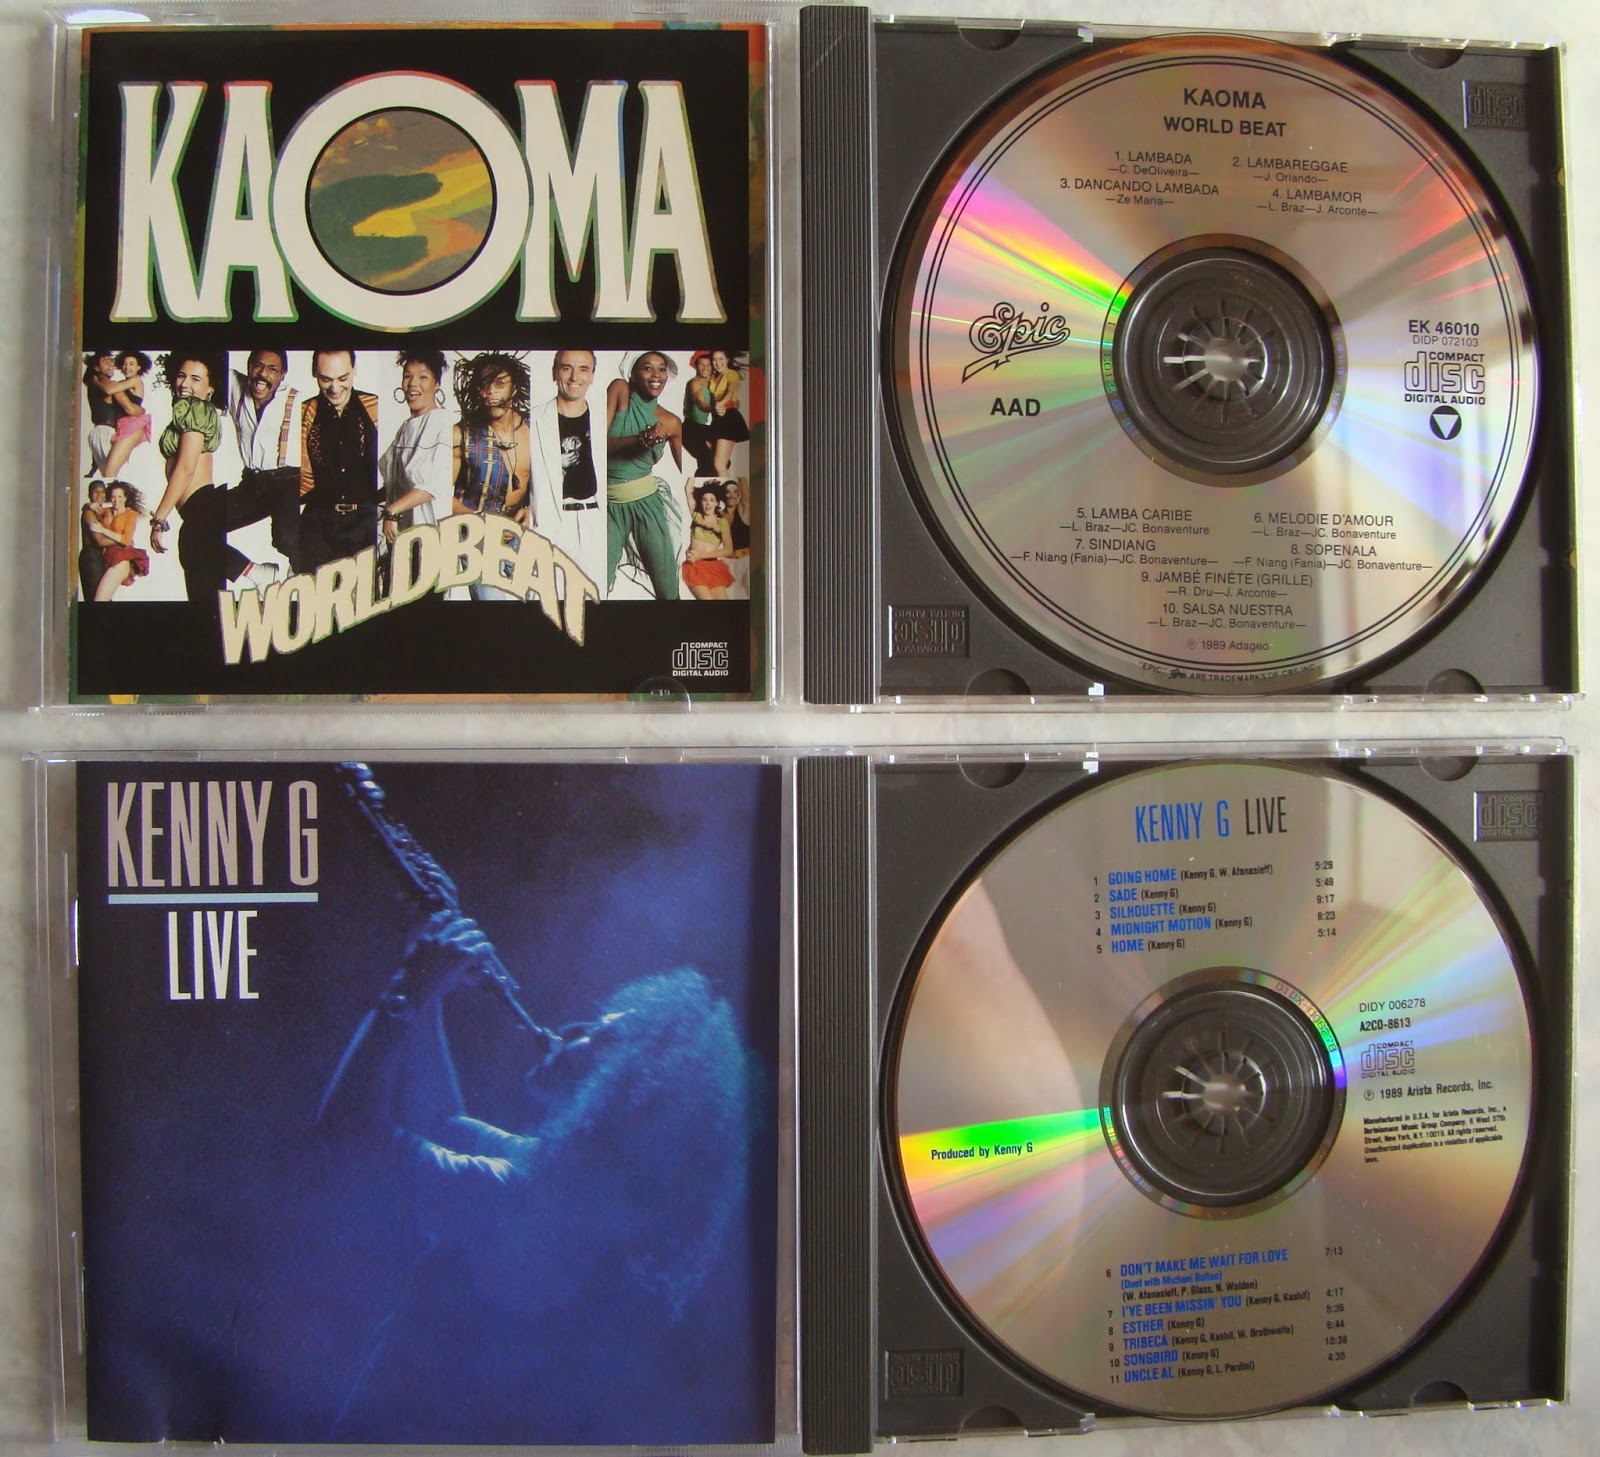 Imported audiophile CDs (sold) CD+kaoma